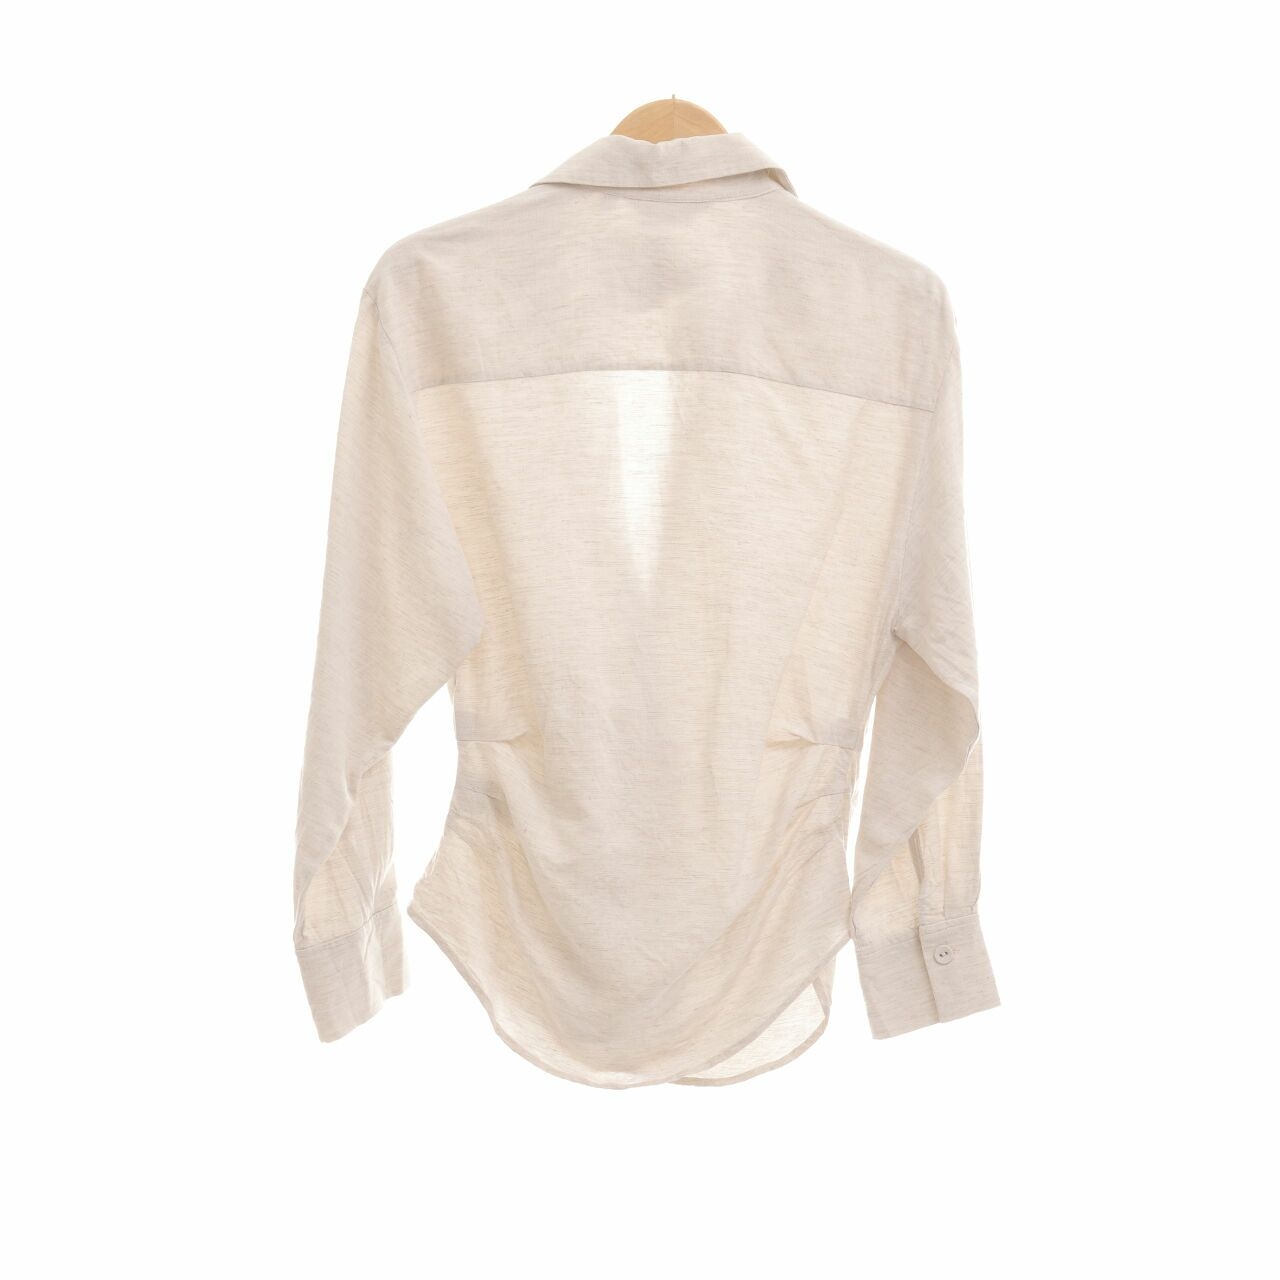 & Other Stories Ivory Shirt